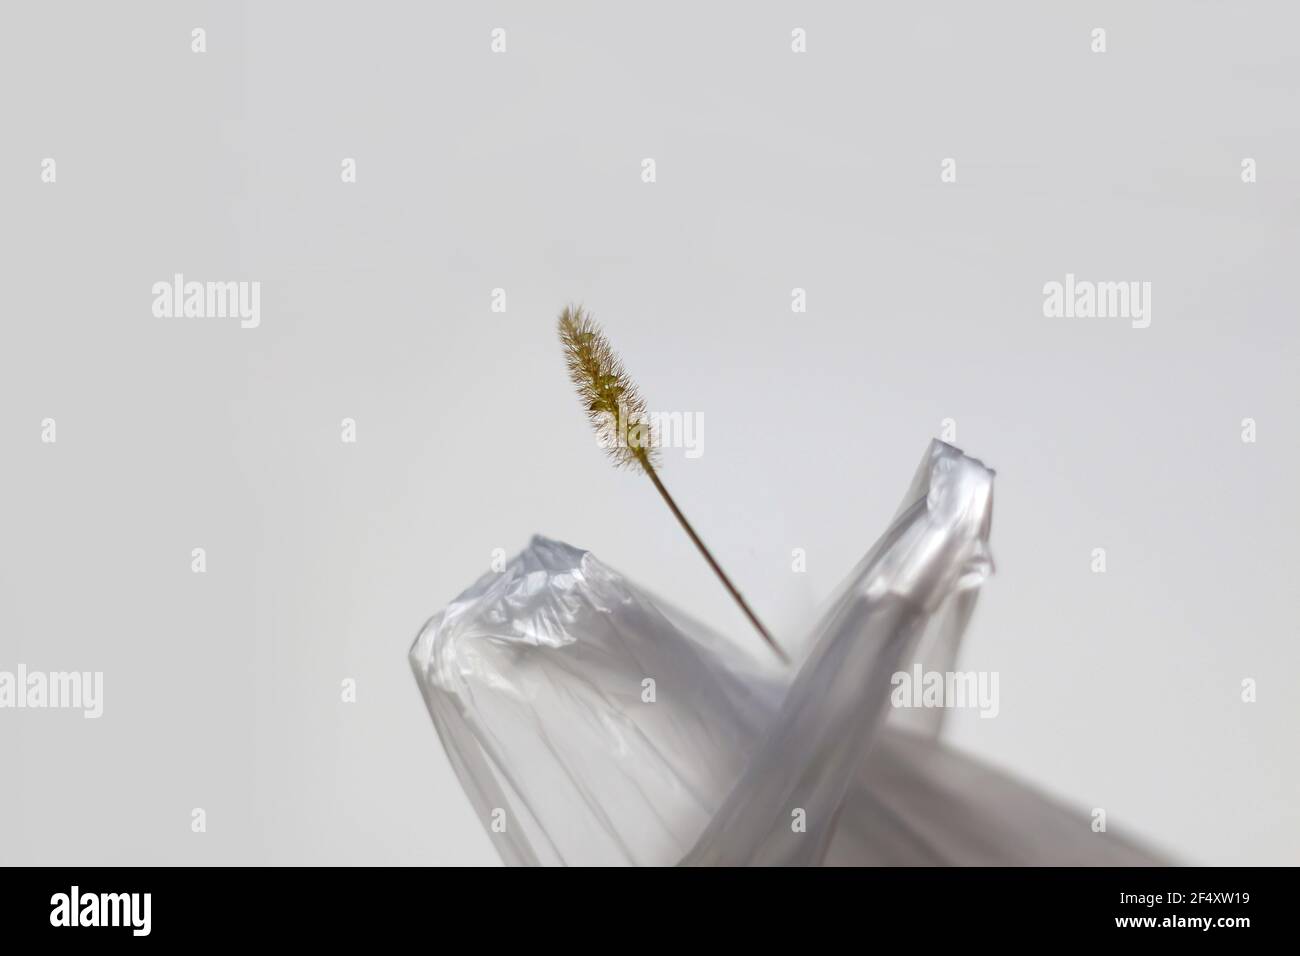 DEFOCUS. Save the planet. A dry blade of grass sticks out. Ecological problems. Blur cellophane bag handles. Minimalistic concept. Out of focus Stock Photo